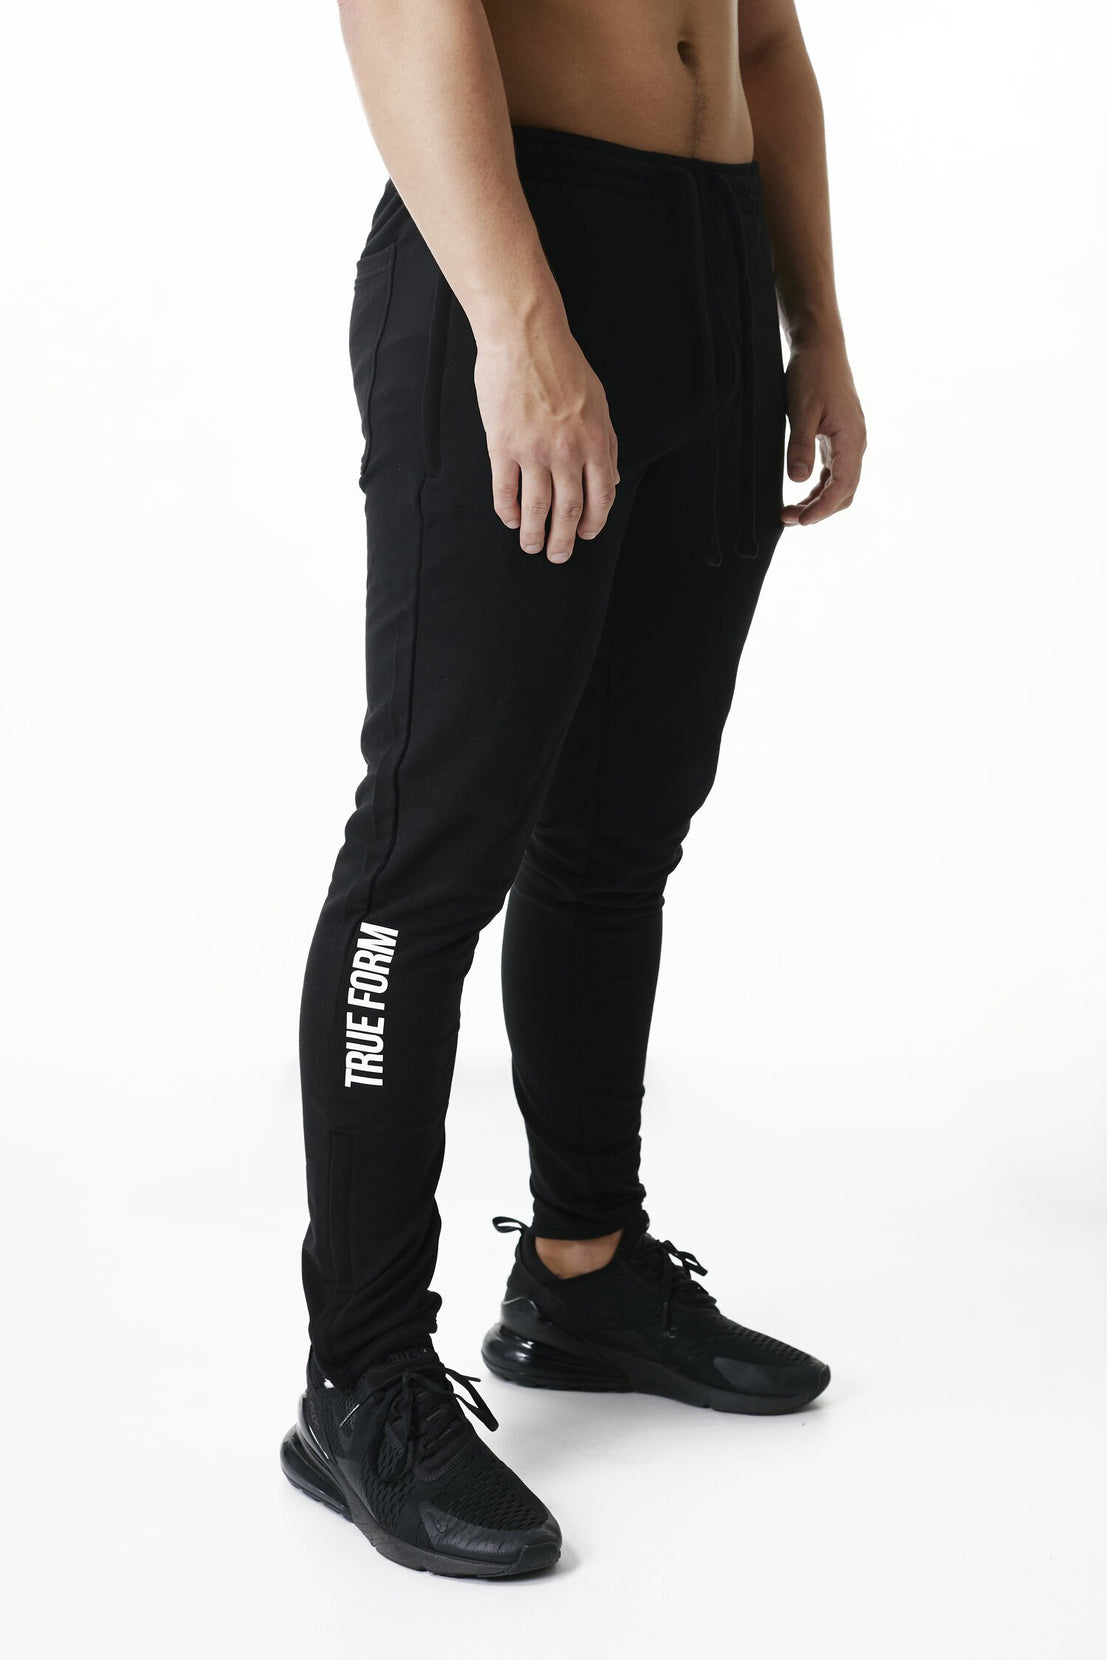 True form UK Tapered Statement Black Joggers for Gym Wear UK